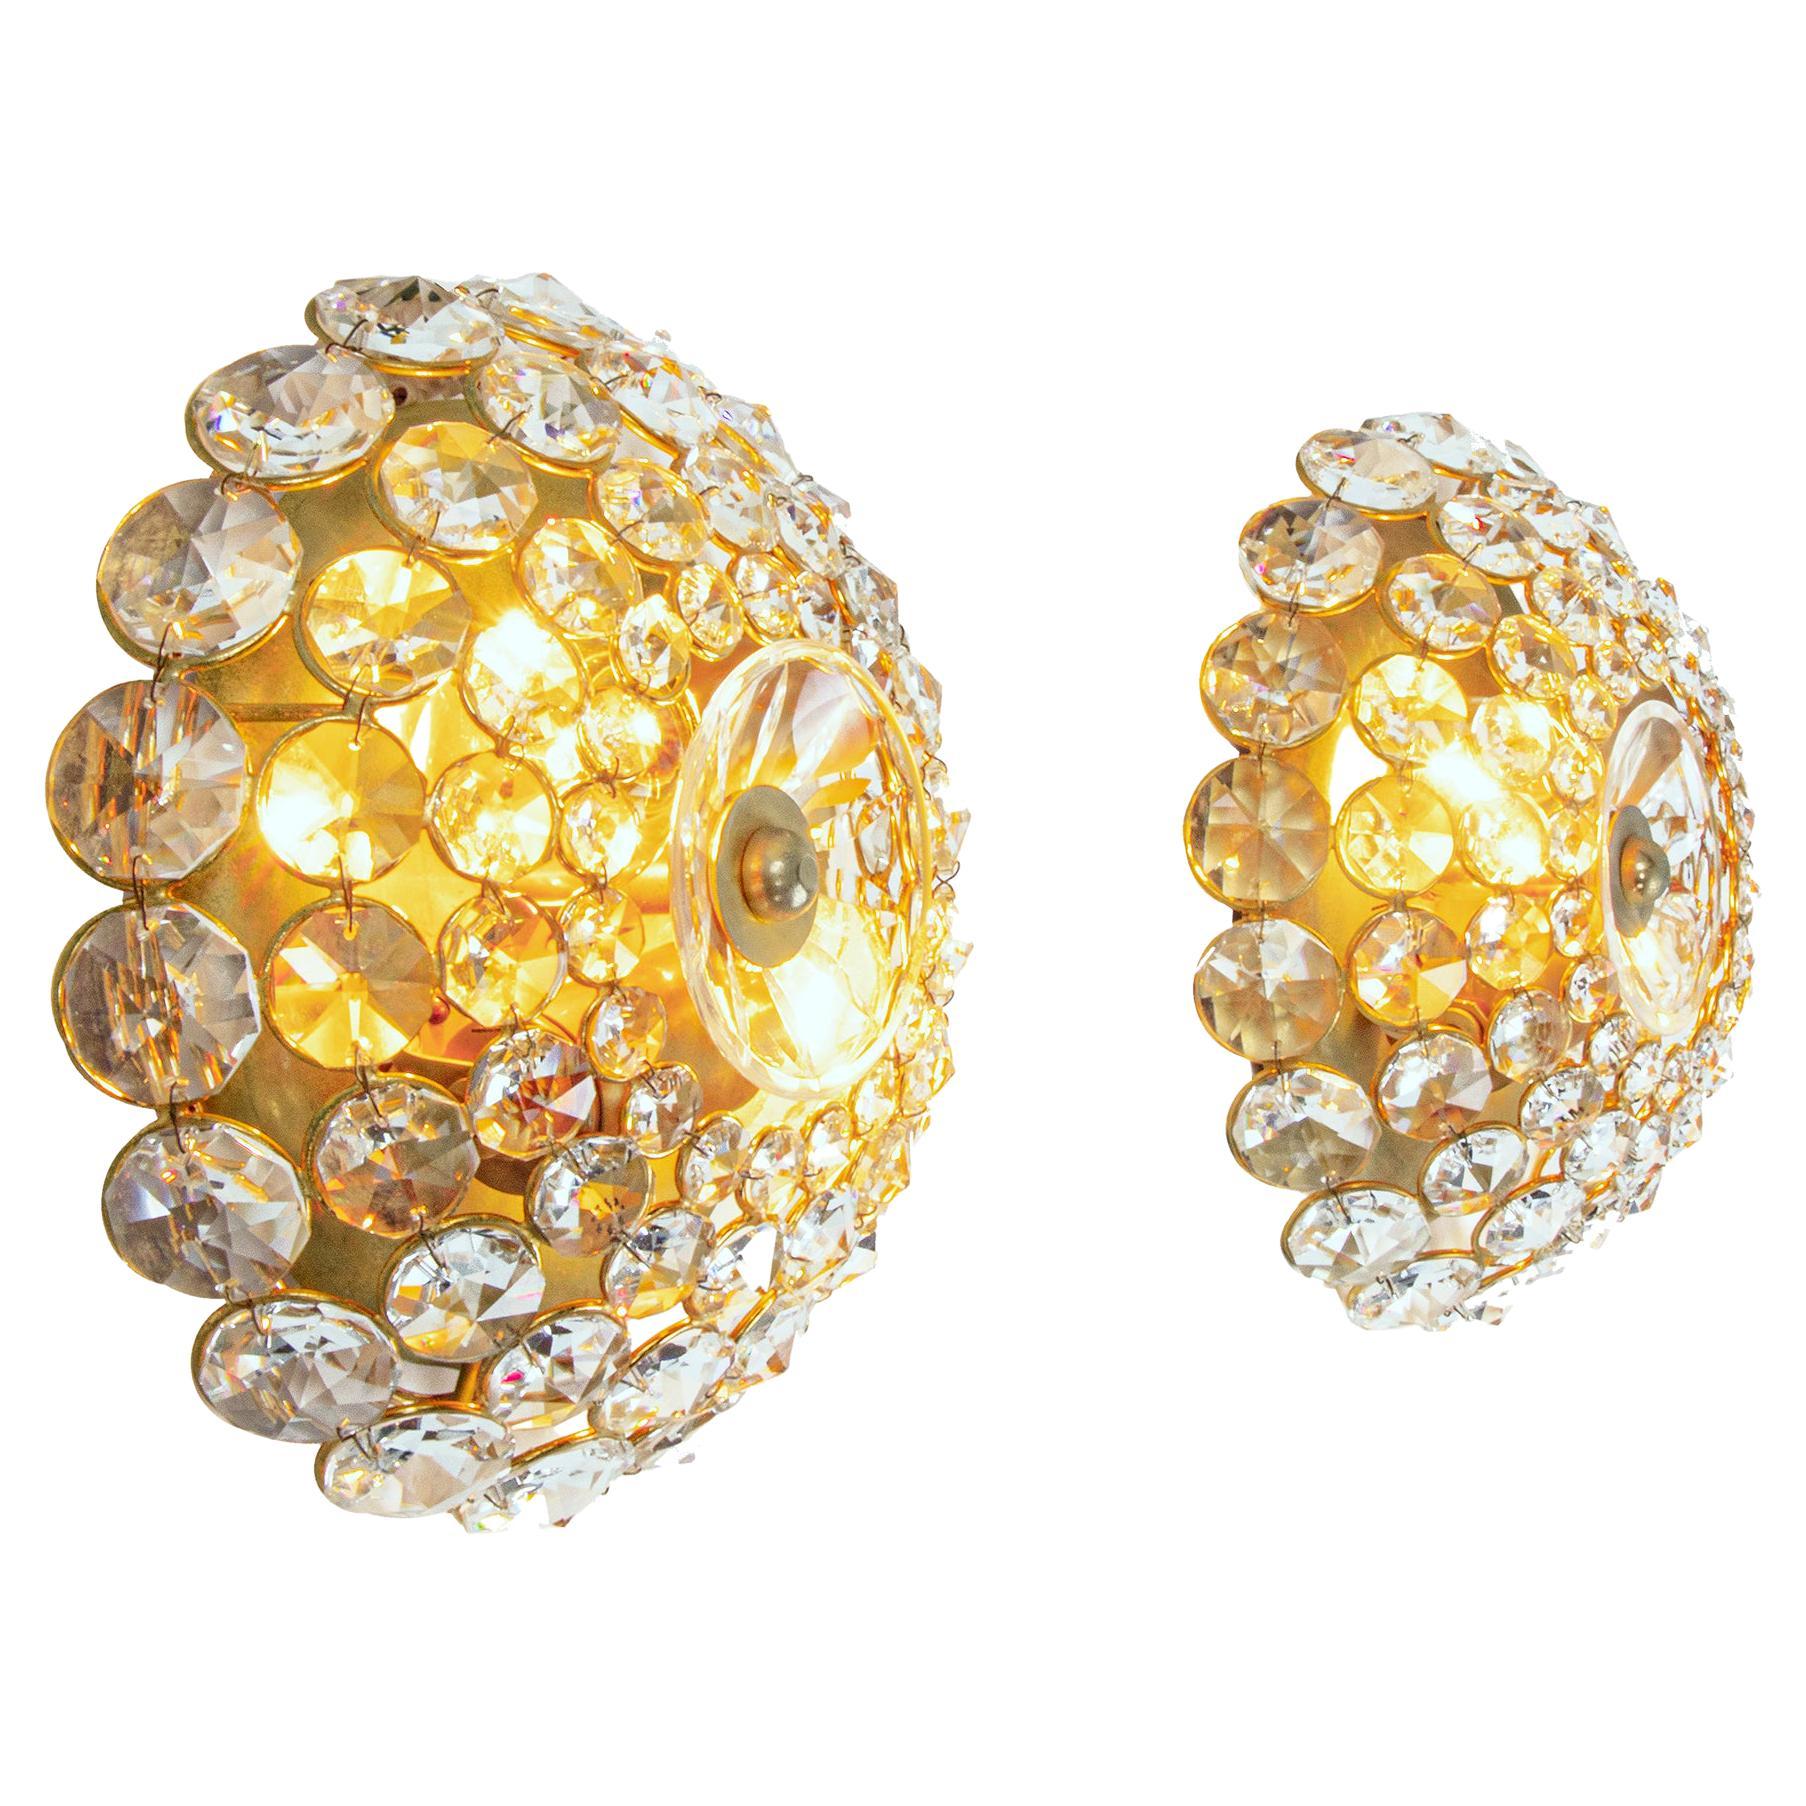 Pair of Gold-Plated Brass and Crystal Glass Wall Lamps Sconces by Palwa, 1960 For Sale